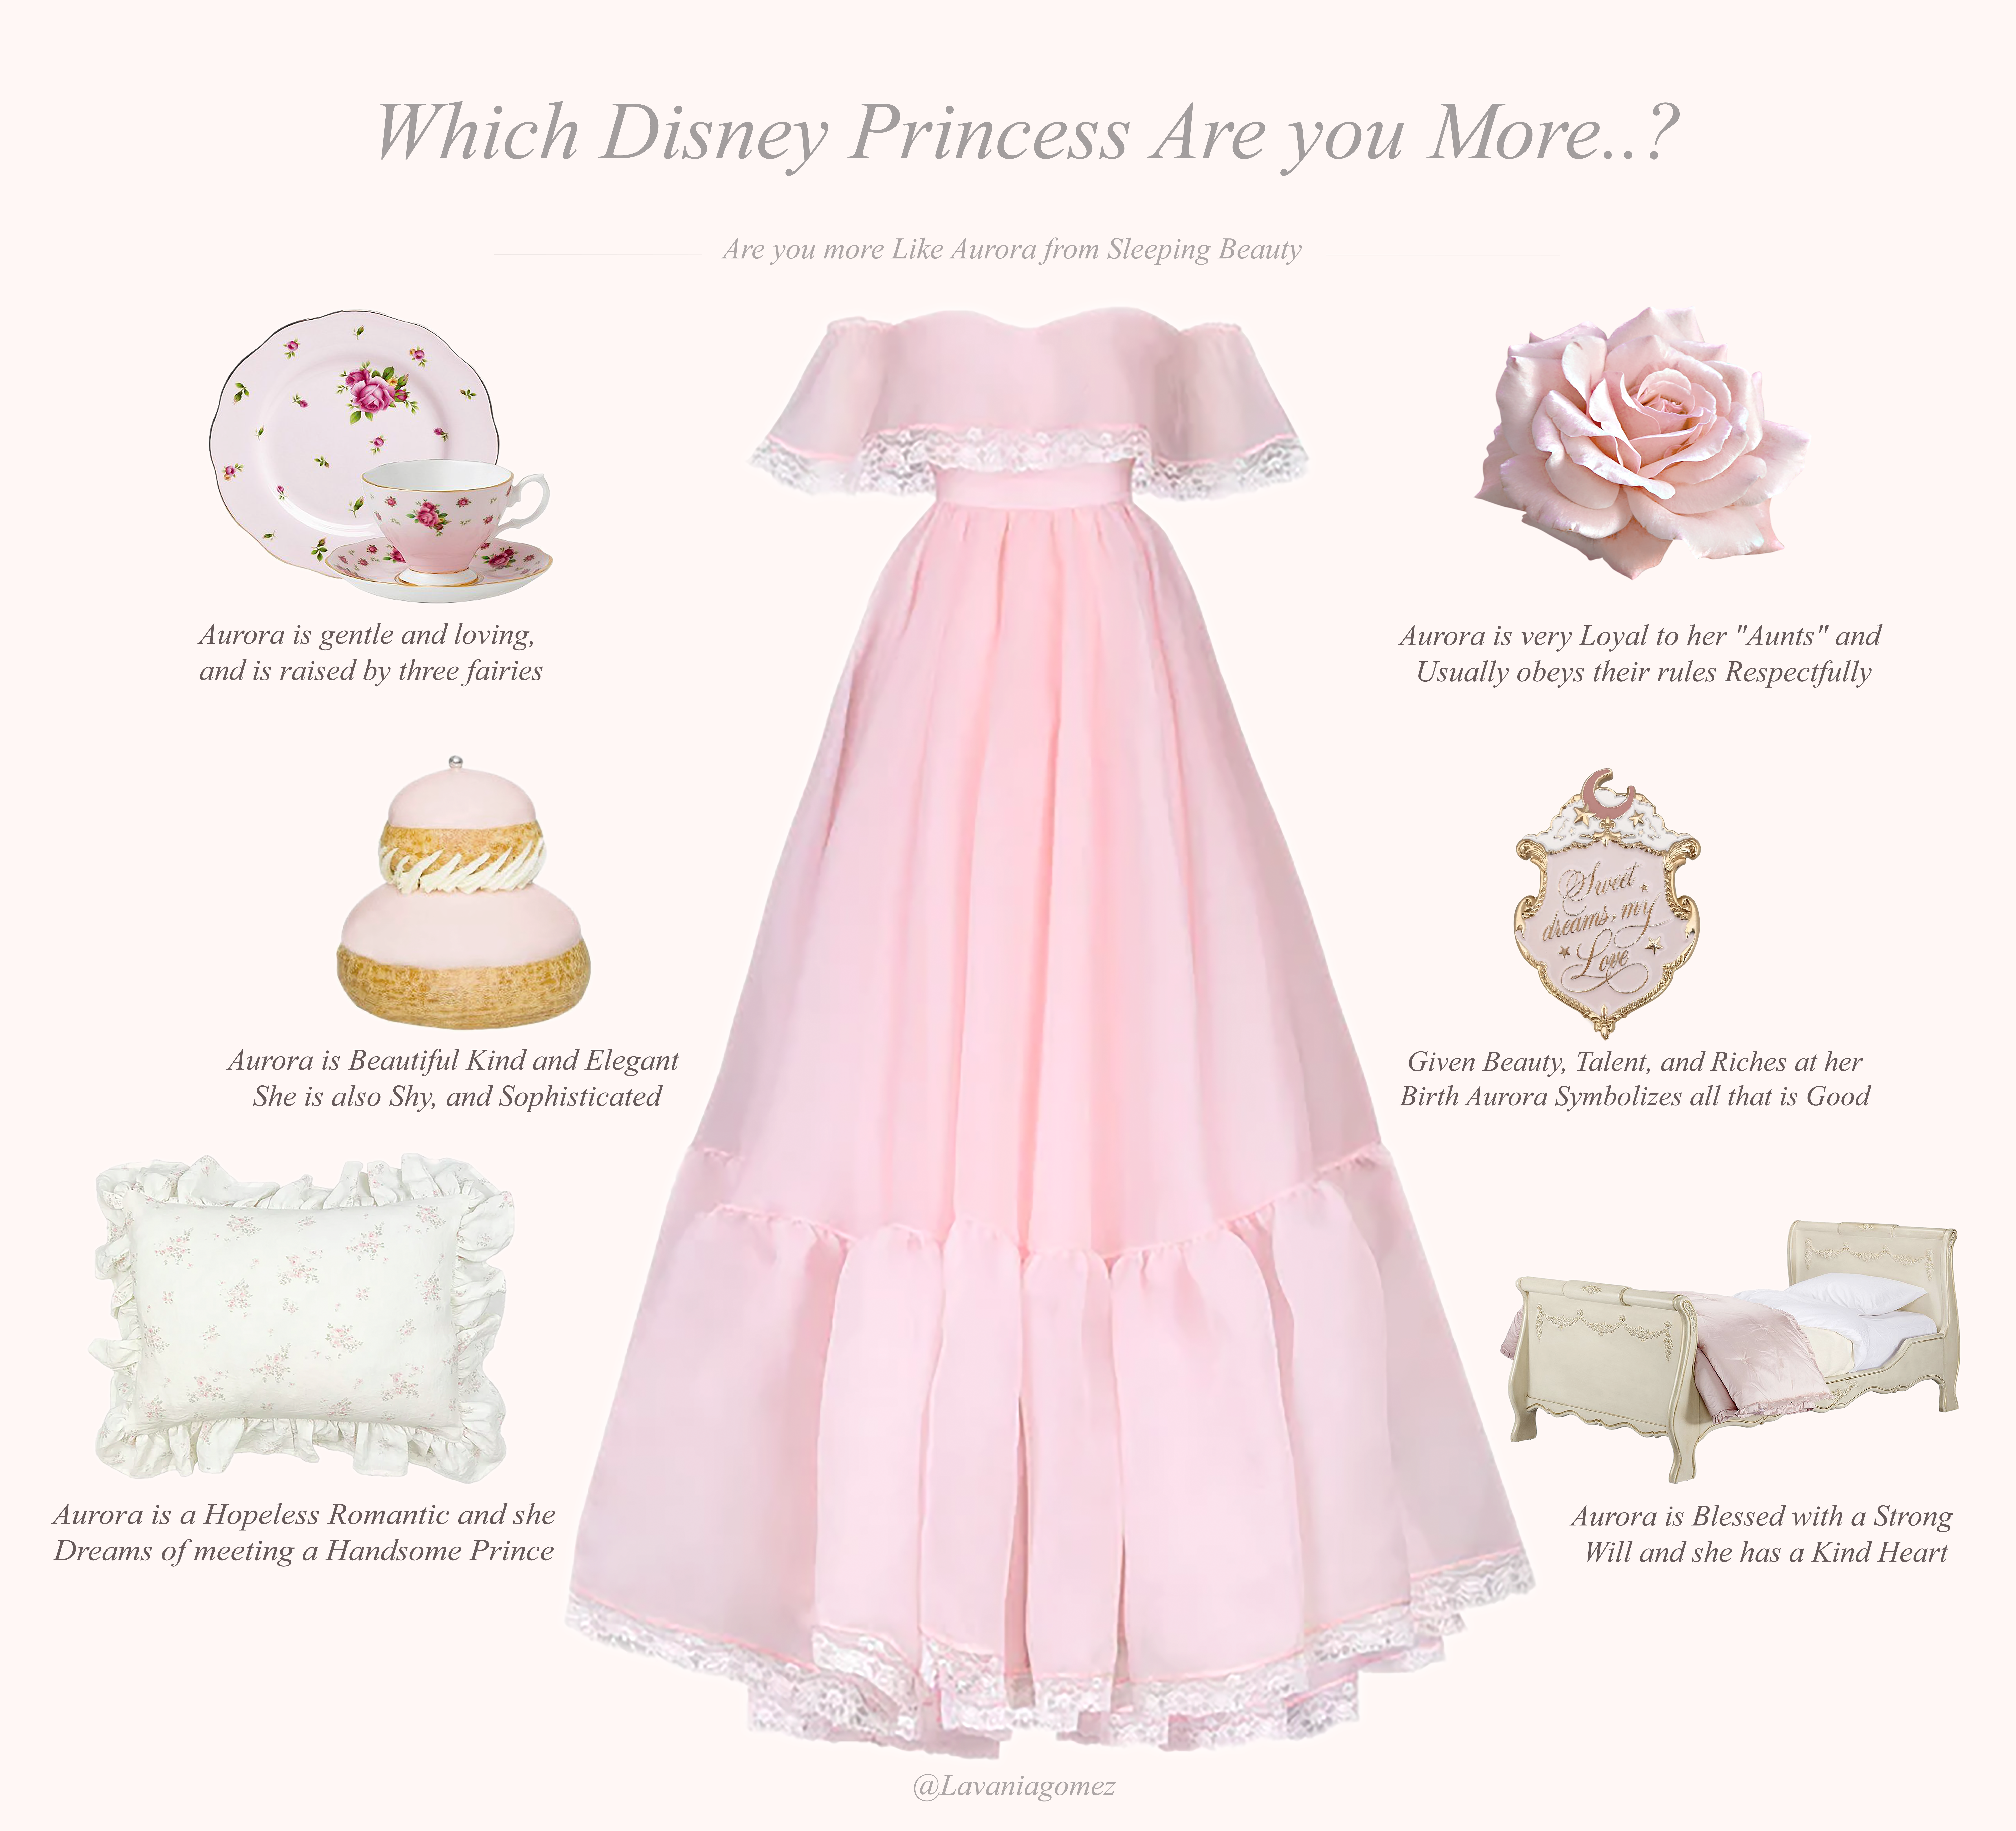 ARE YOU MORE LIKE AURORA FROM SLEEPING BEAUTY